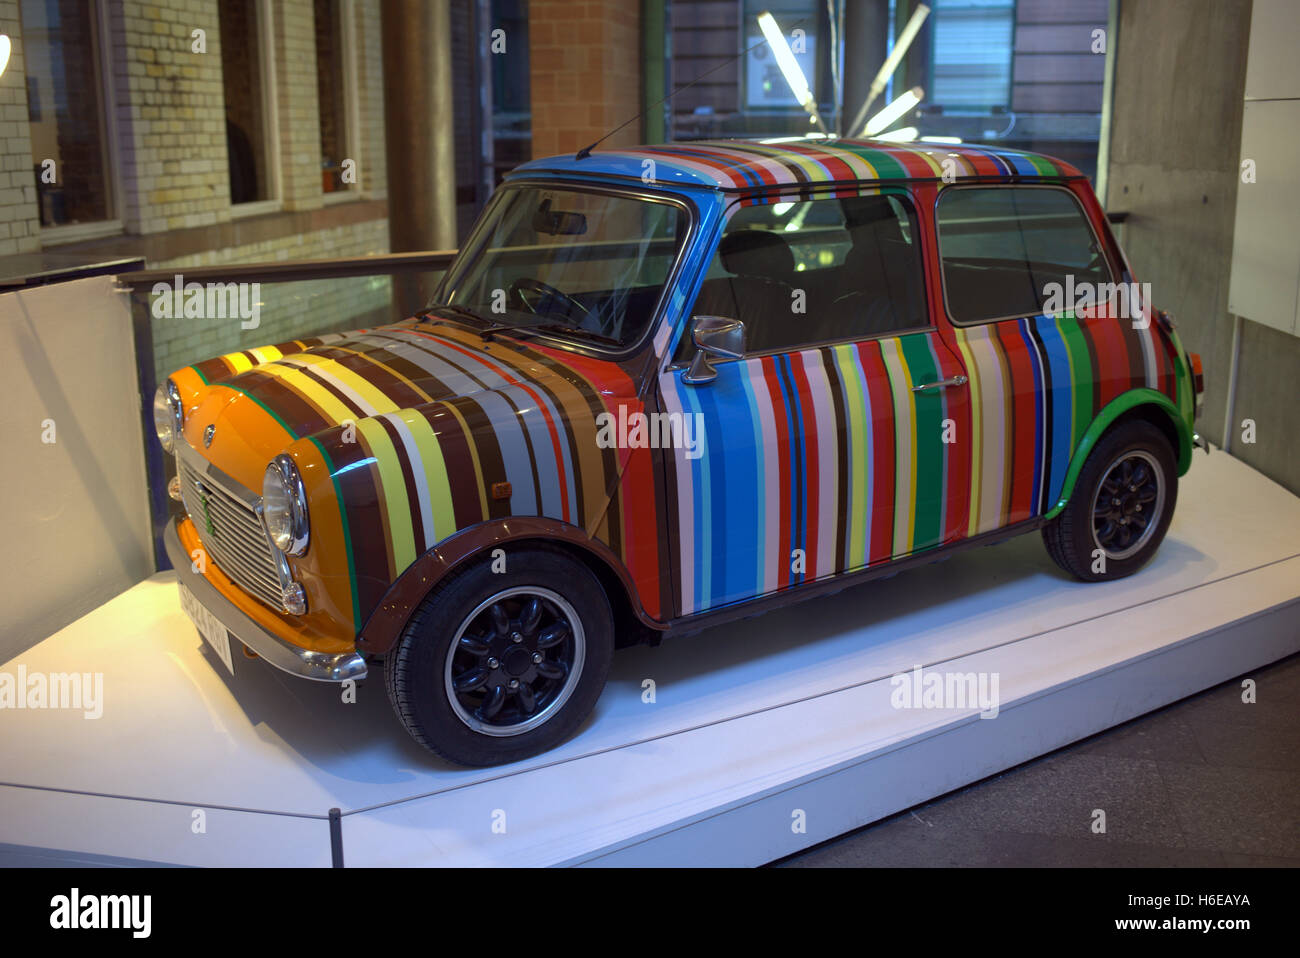 Paul Smith Mini High Resolution Stock Photography and Images - Alamy